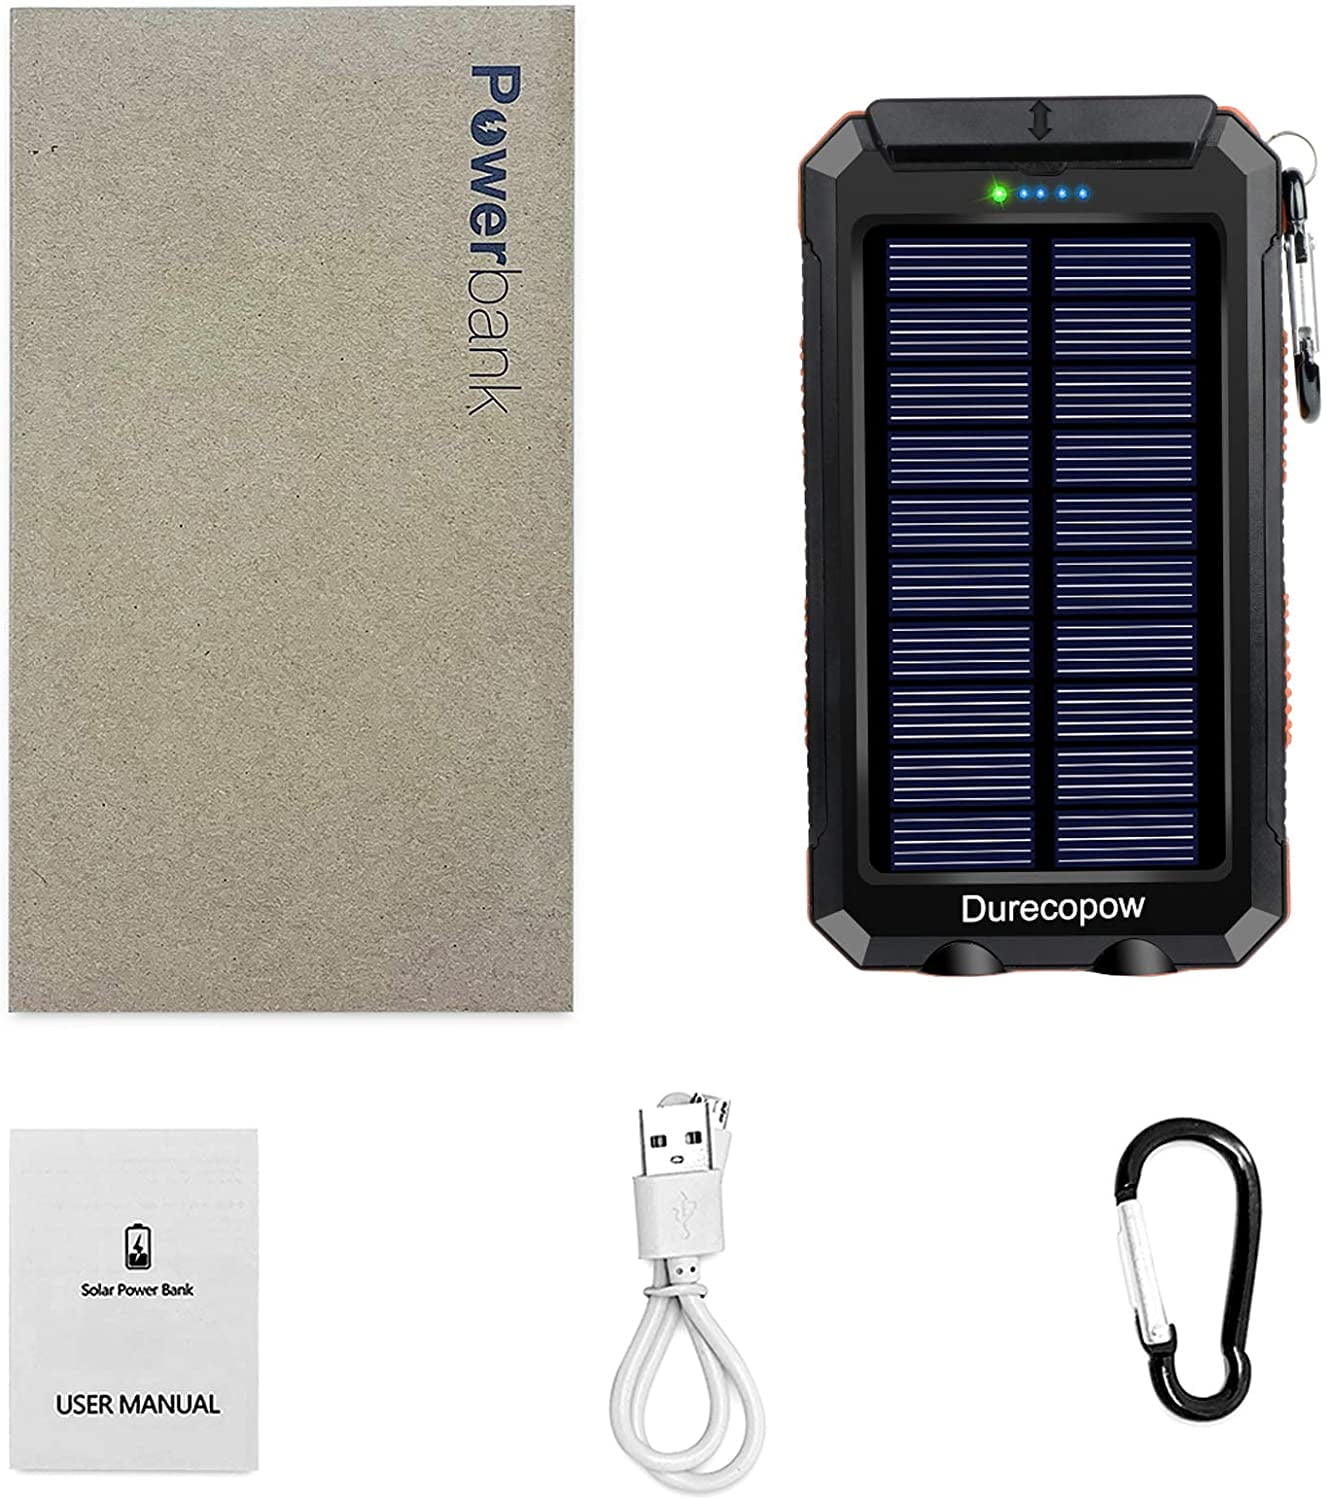 Durecopow 20000mAh Portable Outdoor Waterproof Solar Power Bank Camping External Backup Battery Pack Dual 5V USB Ports Output Blue Solar Charger 2 Led Light Flashlight with Compass 